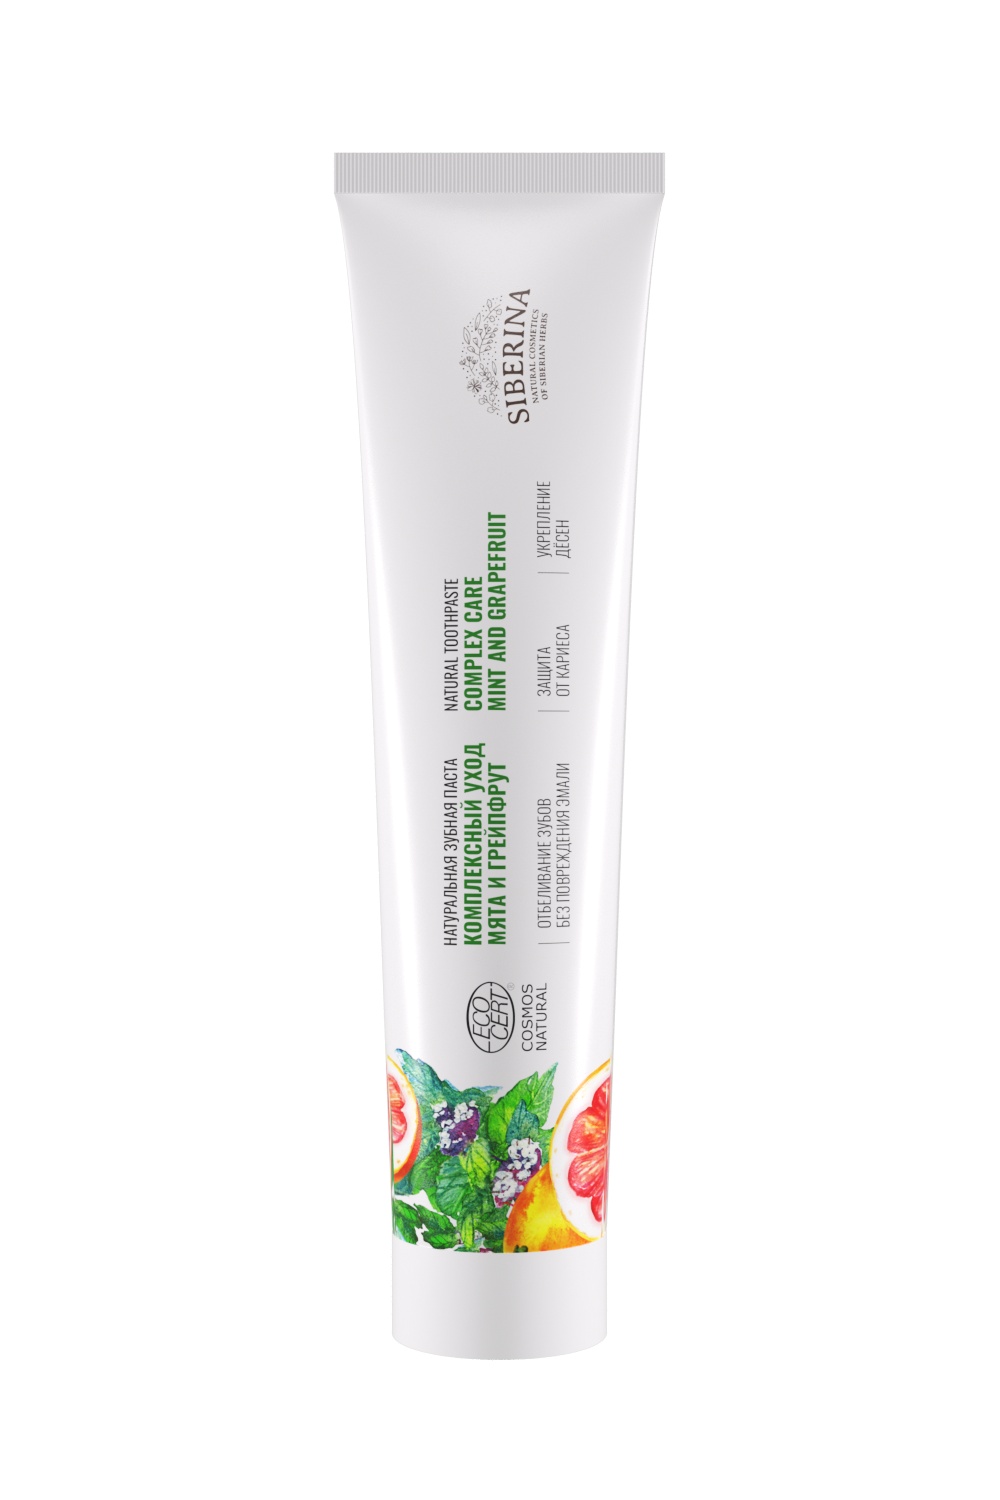 NATURAL TOOTHPASTE COMPLEX CARE MINT AND GRAPEFRUIT